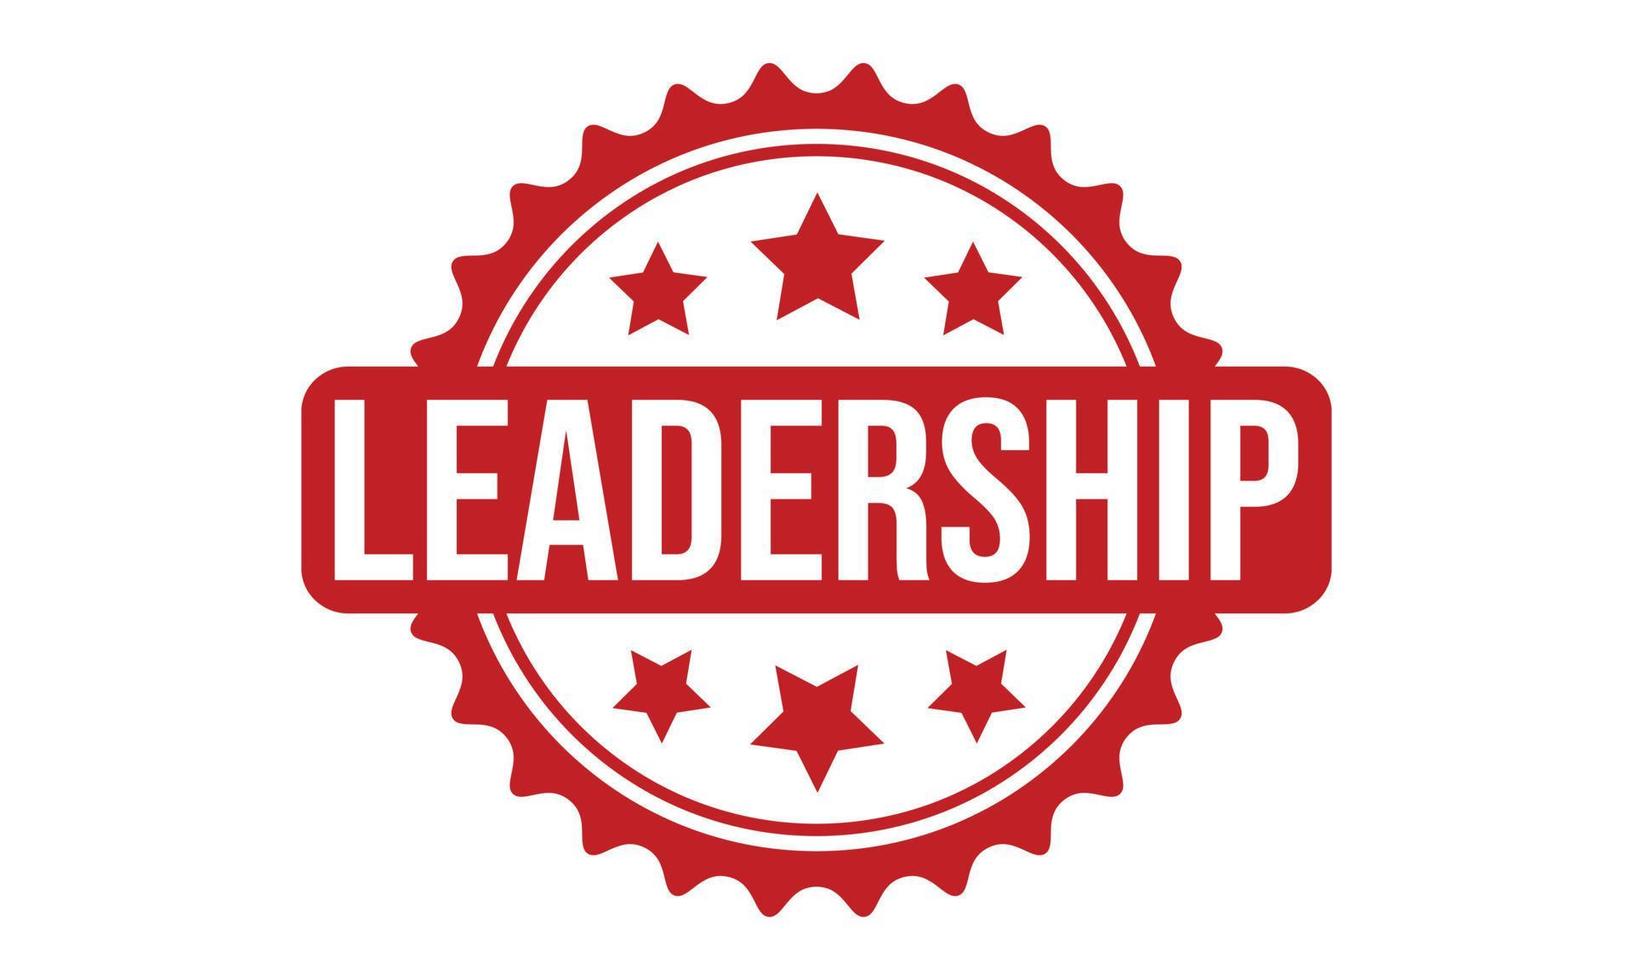 Leadership Rubber Stamp Seal Vector